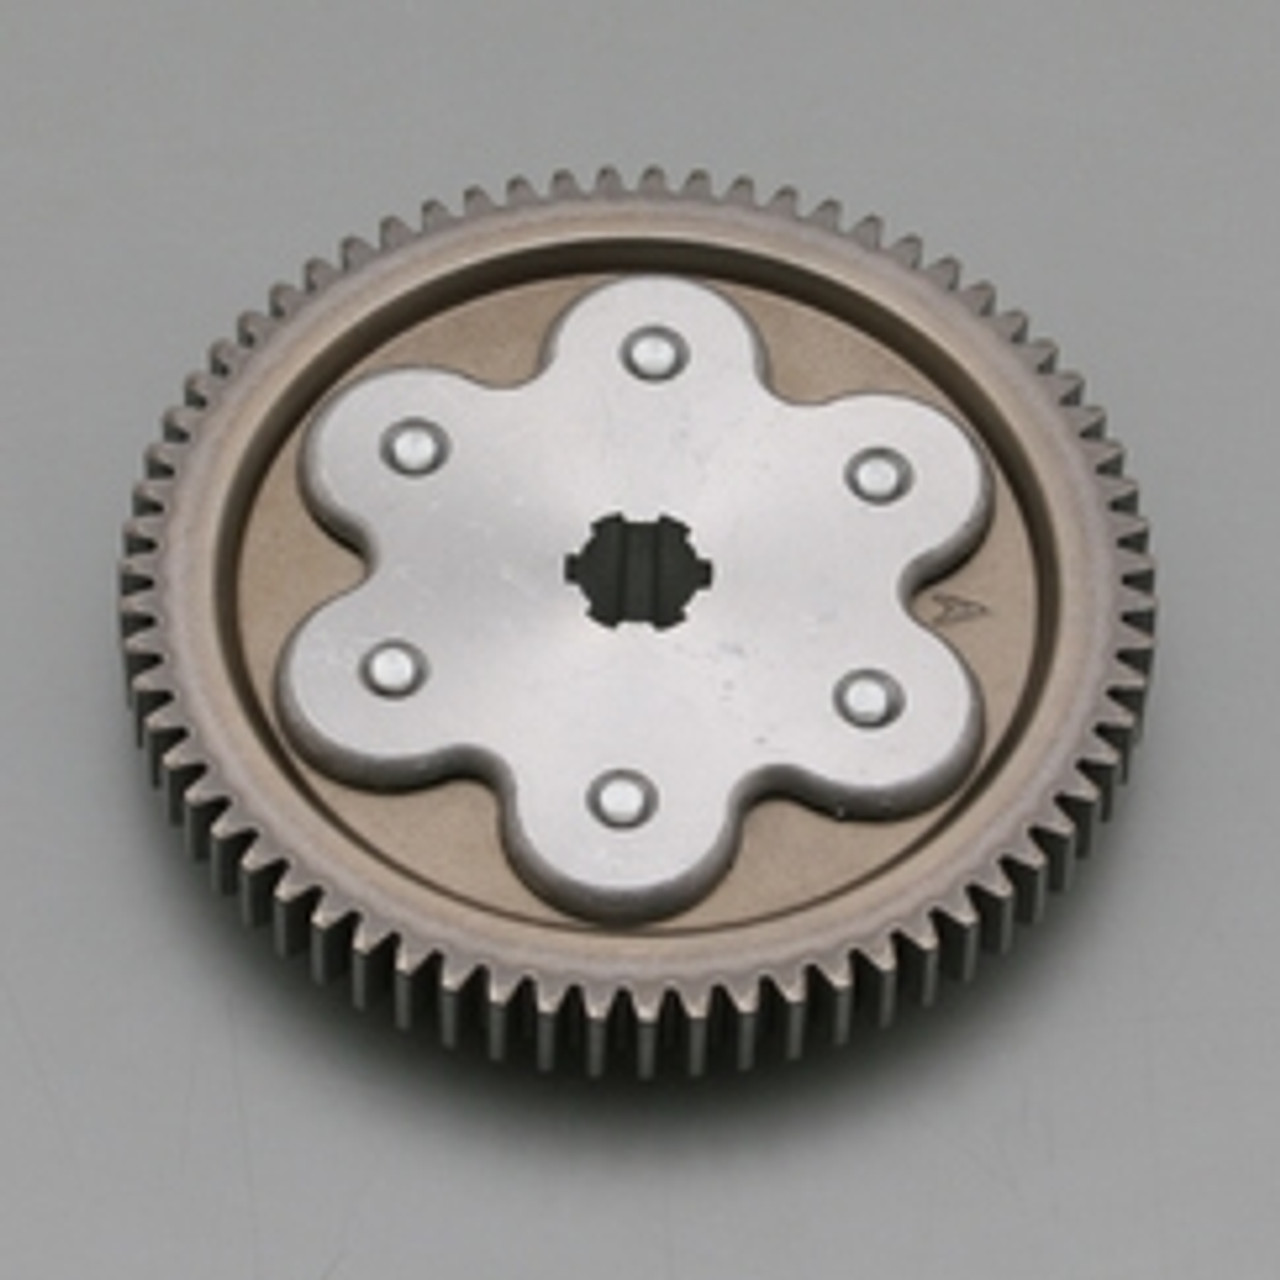 Repair Primary Reinforcement 3 Disc Clutch Kit - Primary Driven Gear